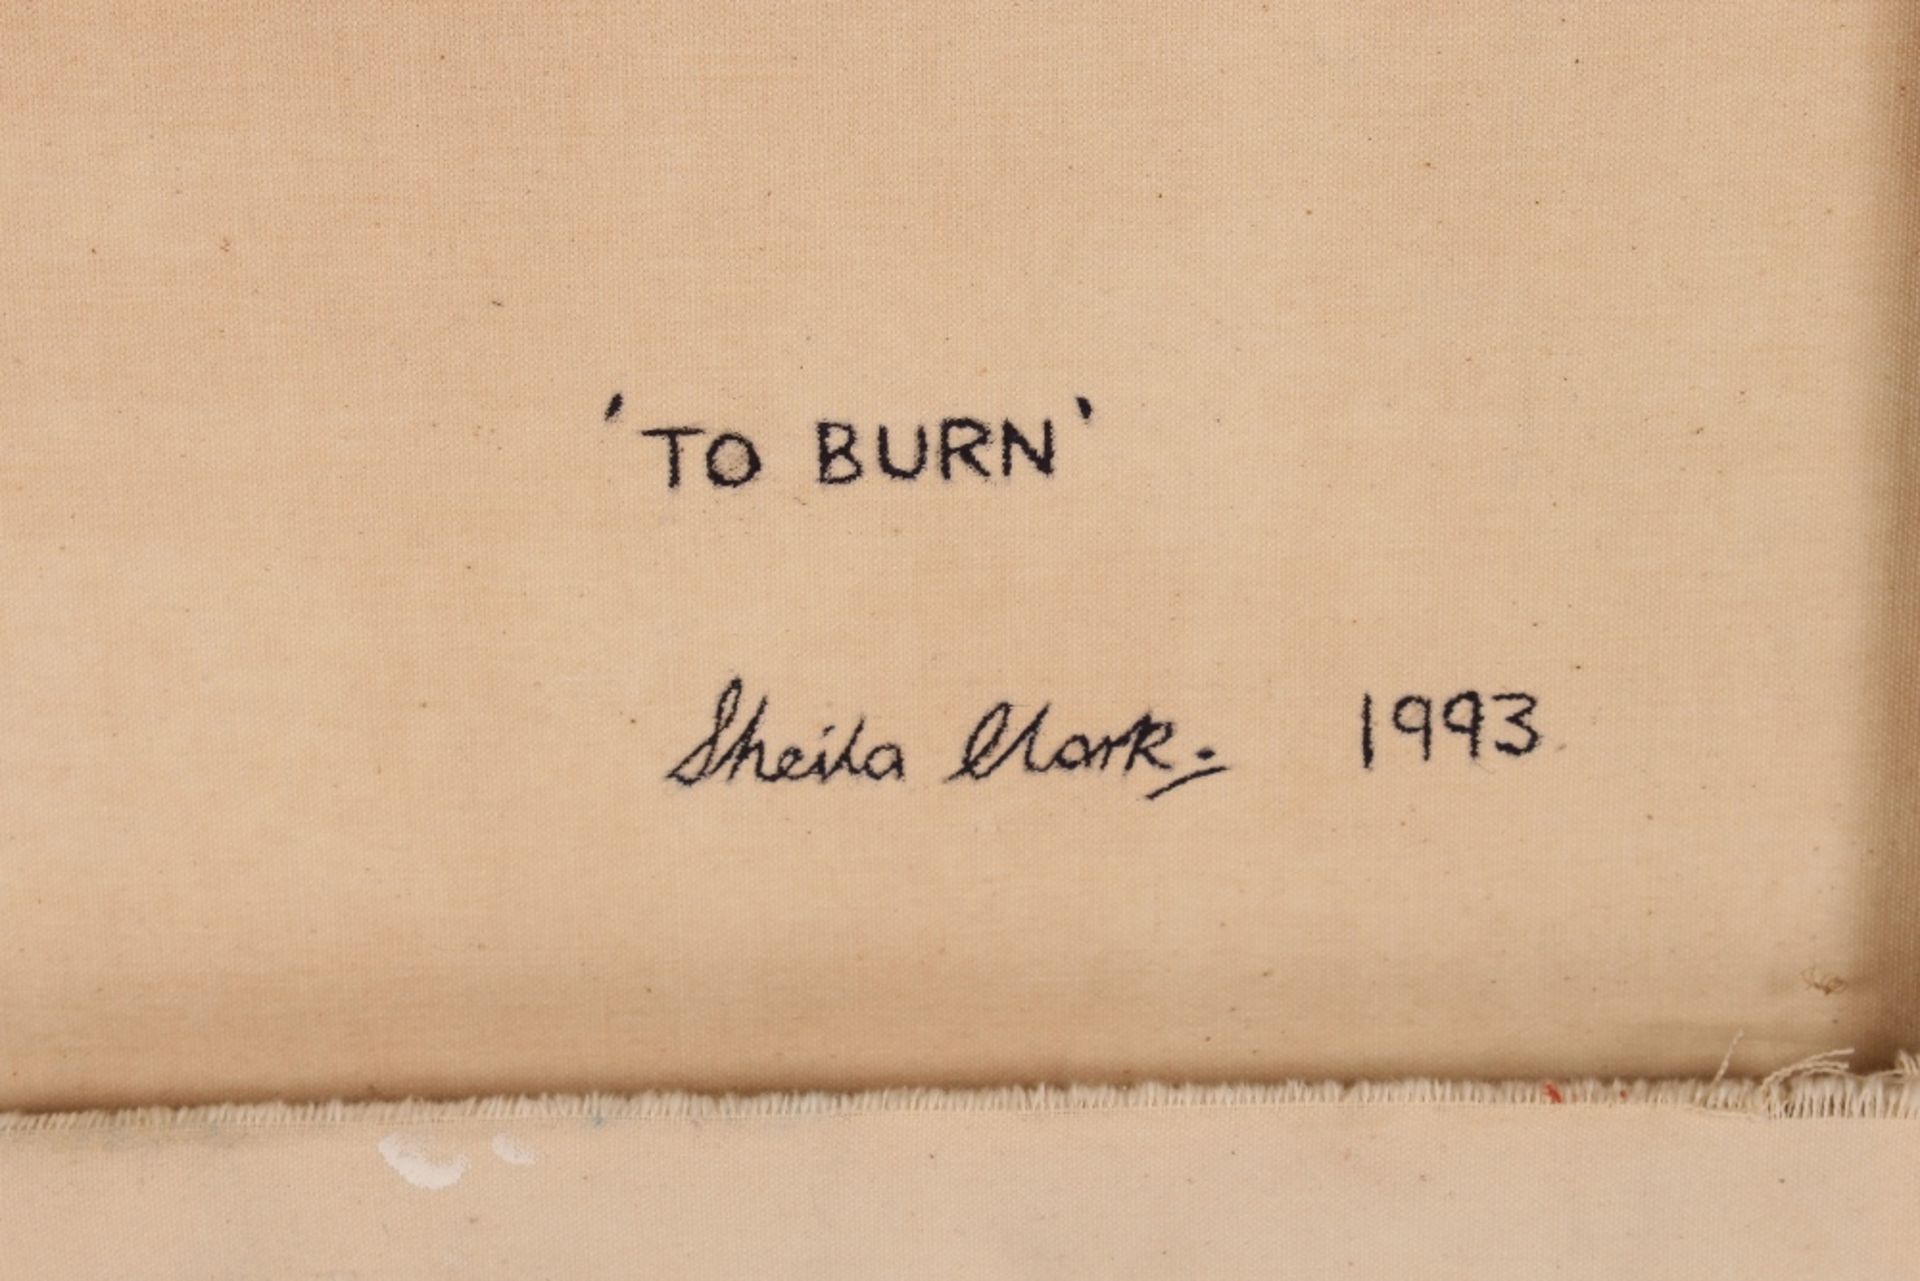 Sheila Clarke (modern British), "To Burn" oil on canvas, signed verso dated 1993 - Image 4 of 4